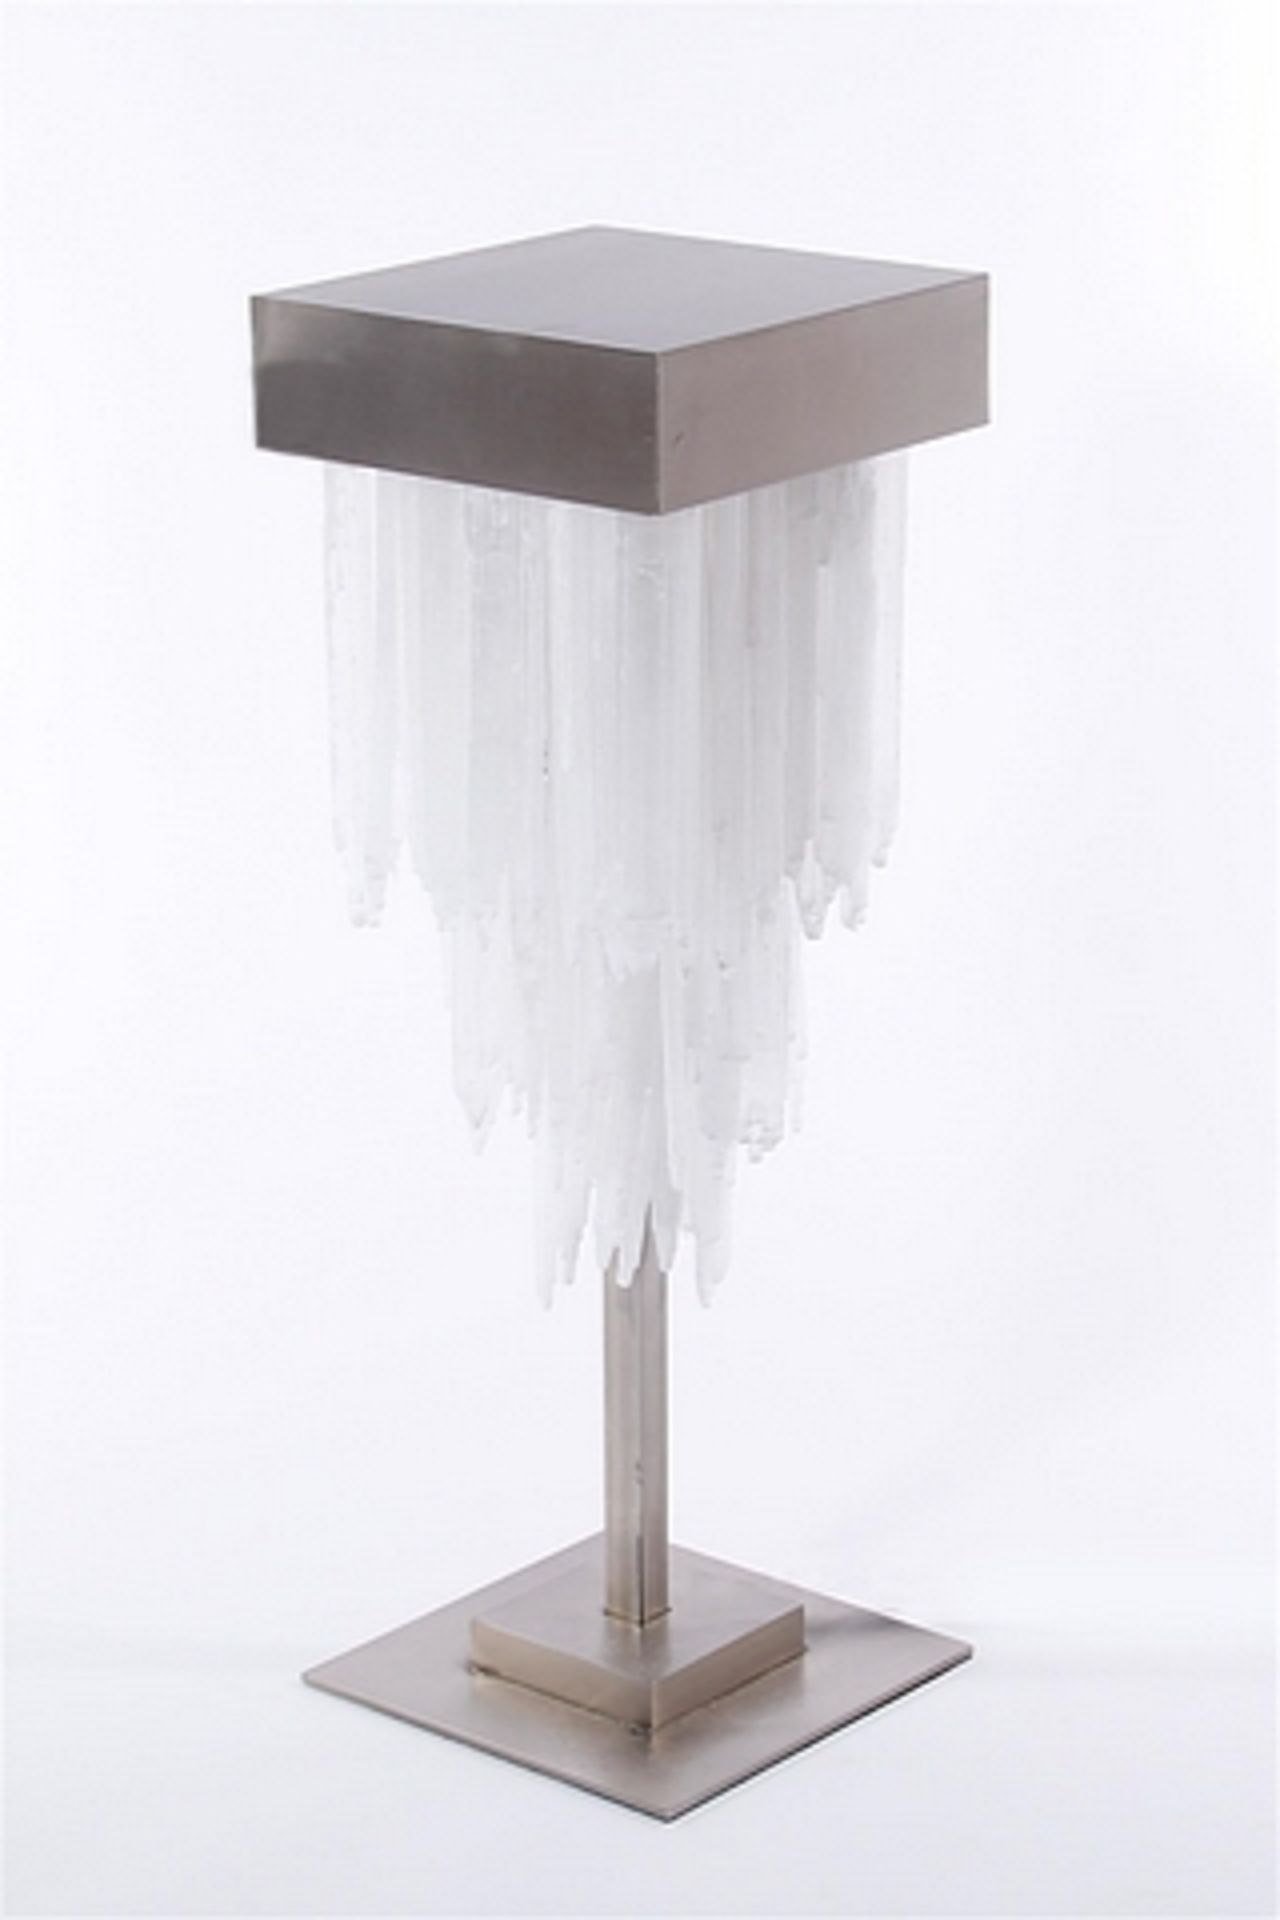 Table lamp selenite night lamp square in nickel look with selenite sticks 1 light. Provides a